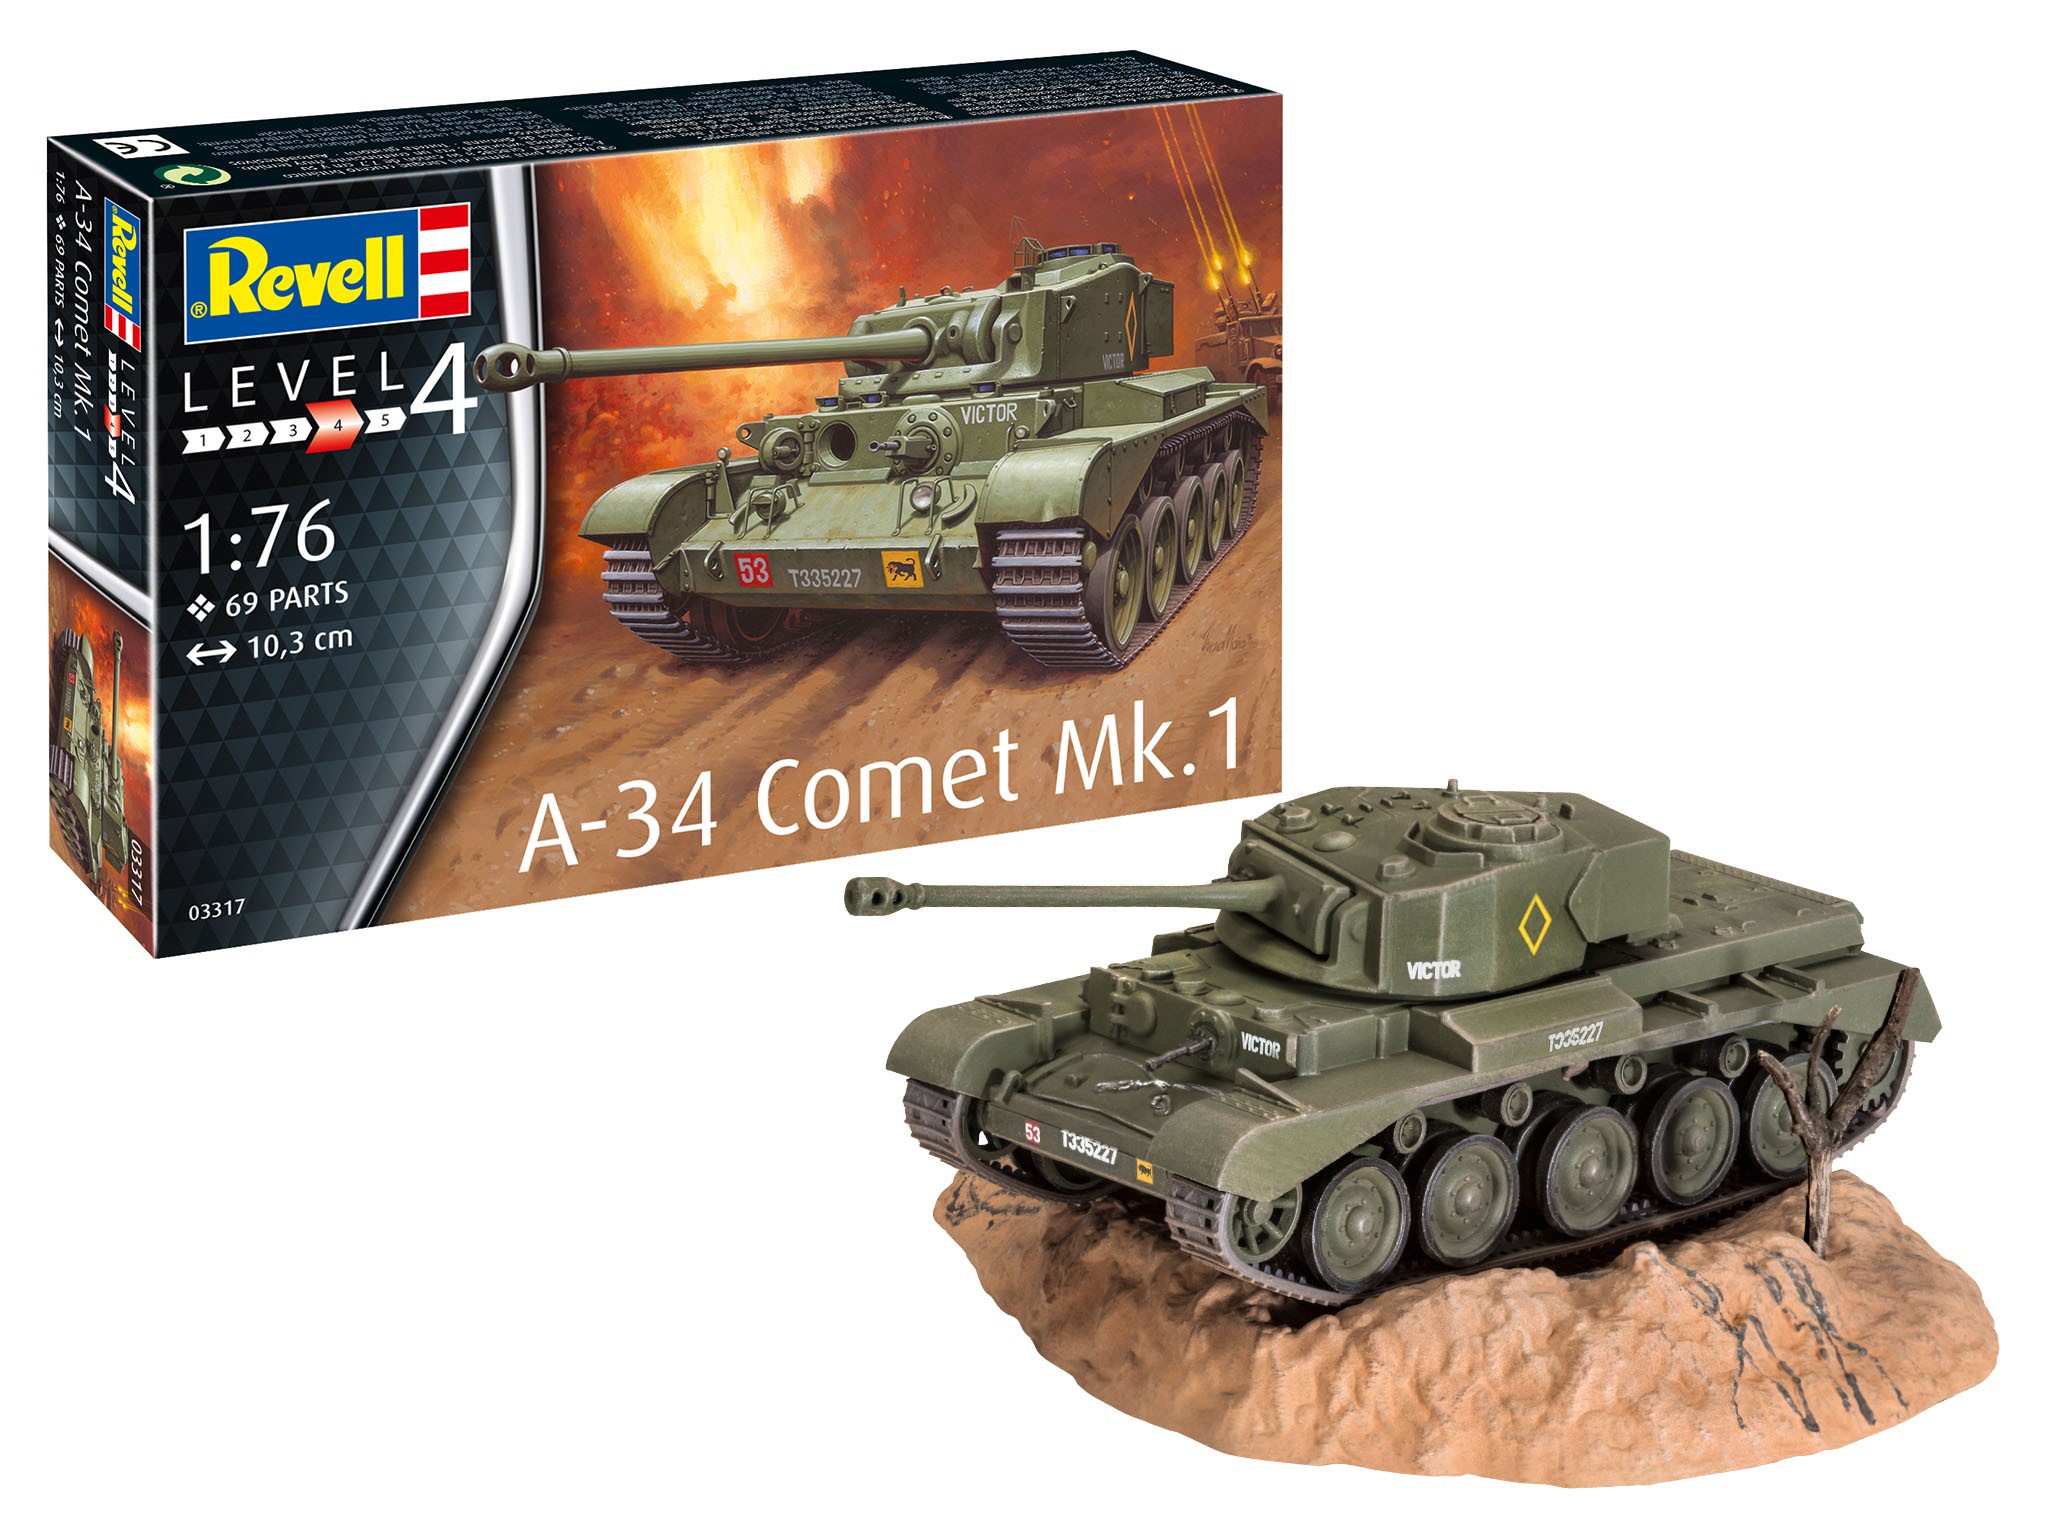 Revell 03317 A-34 Comet Mk.1  1:76